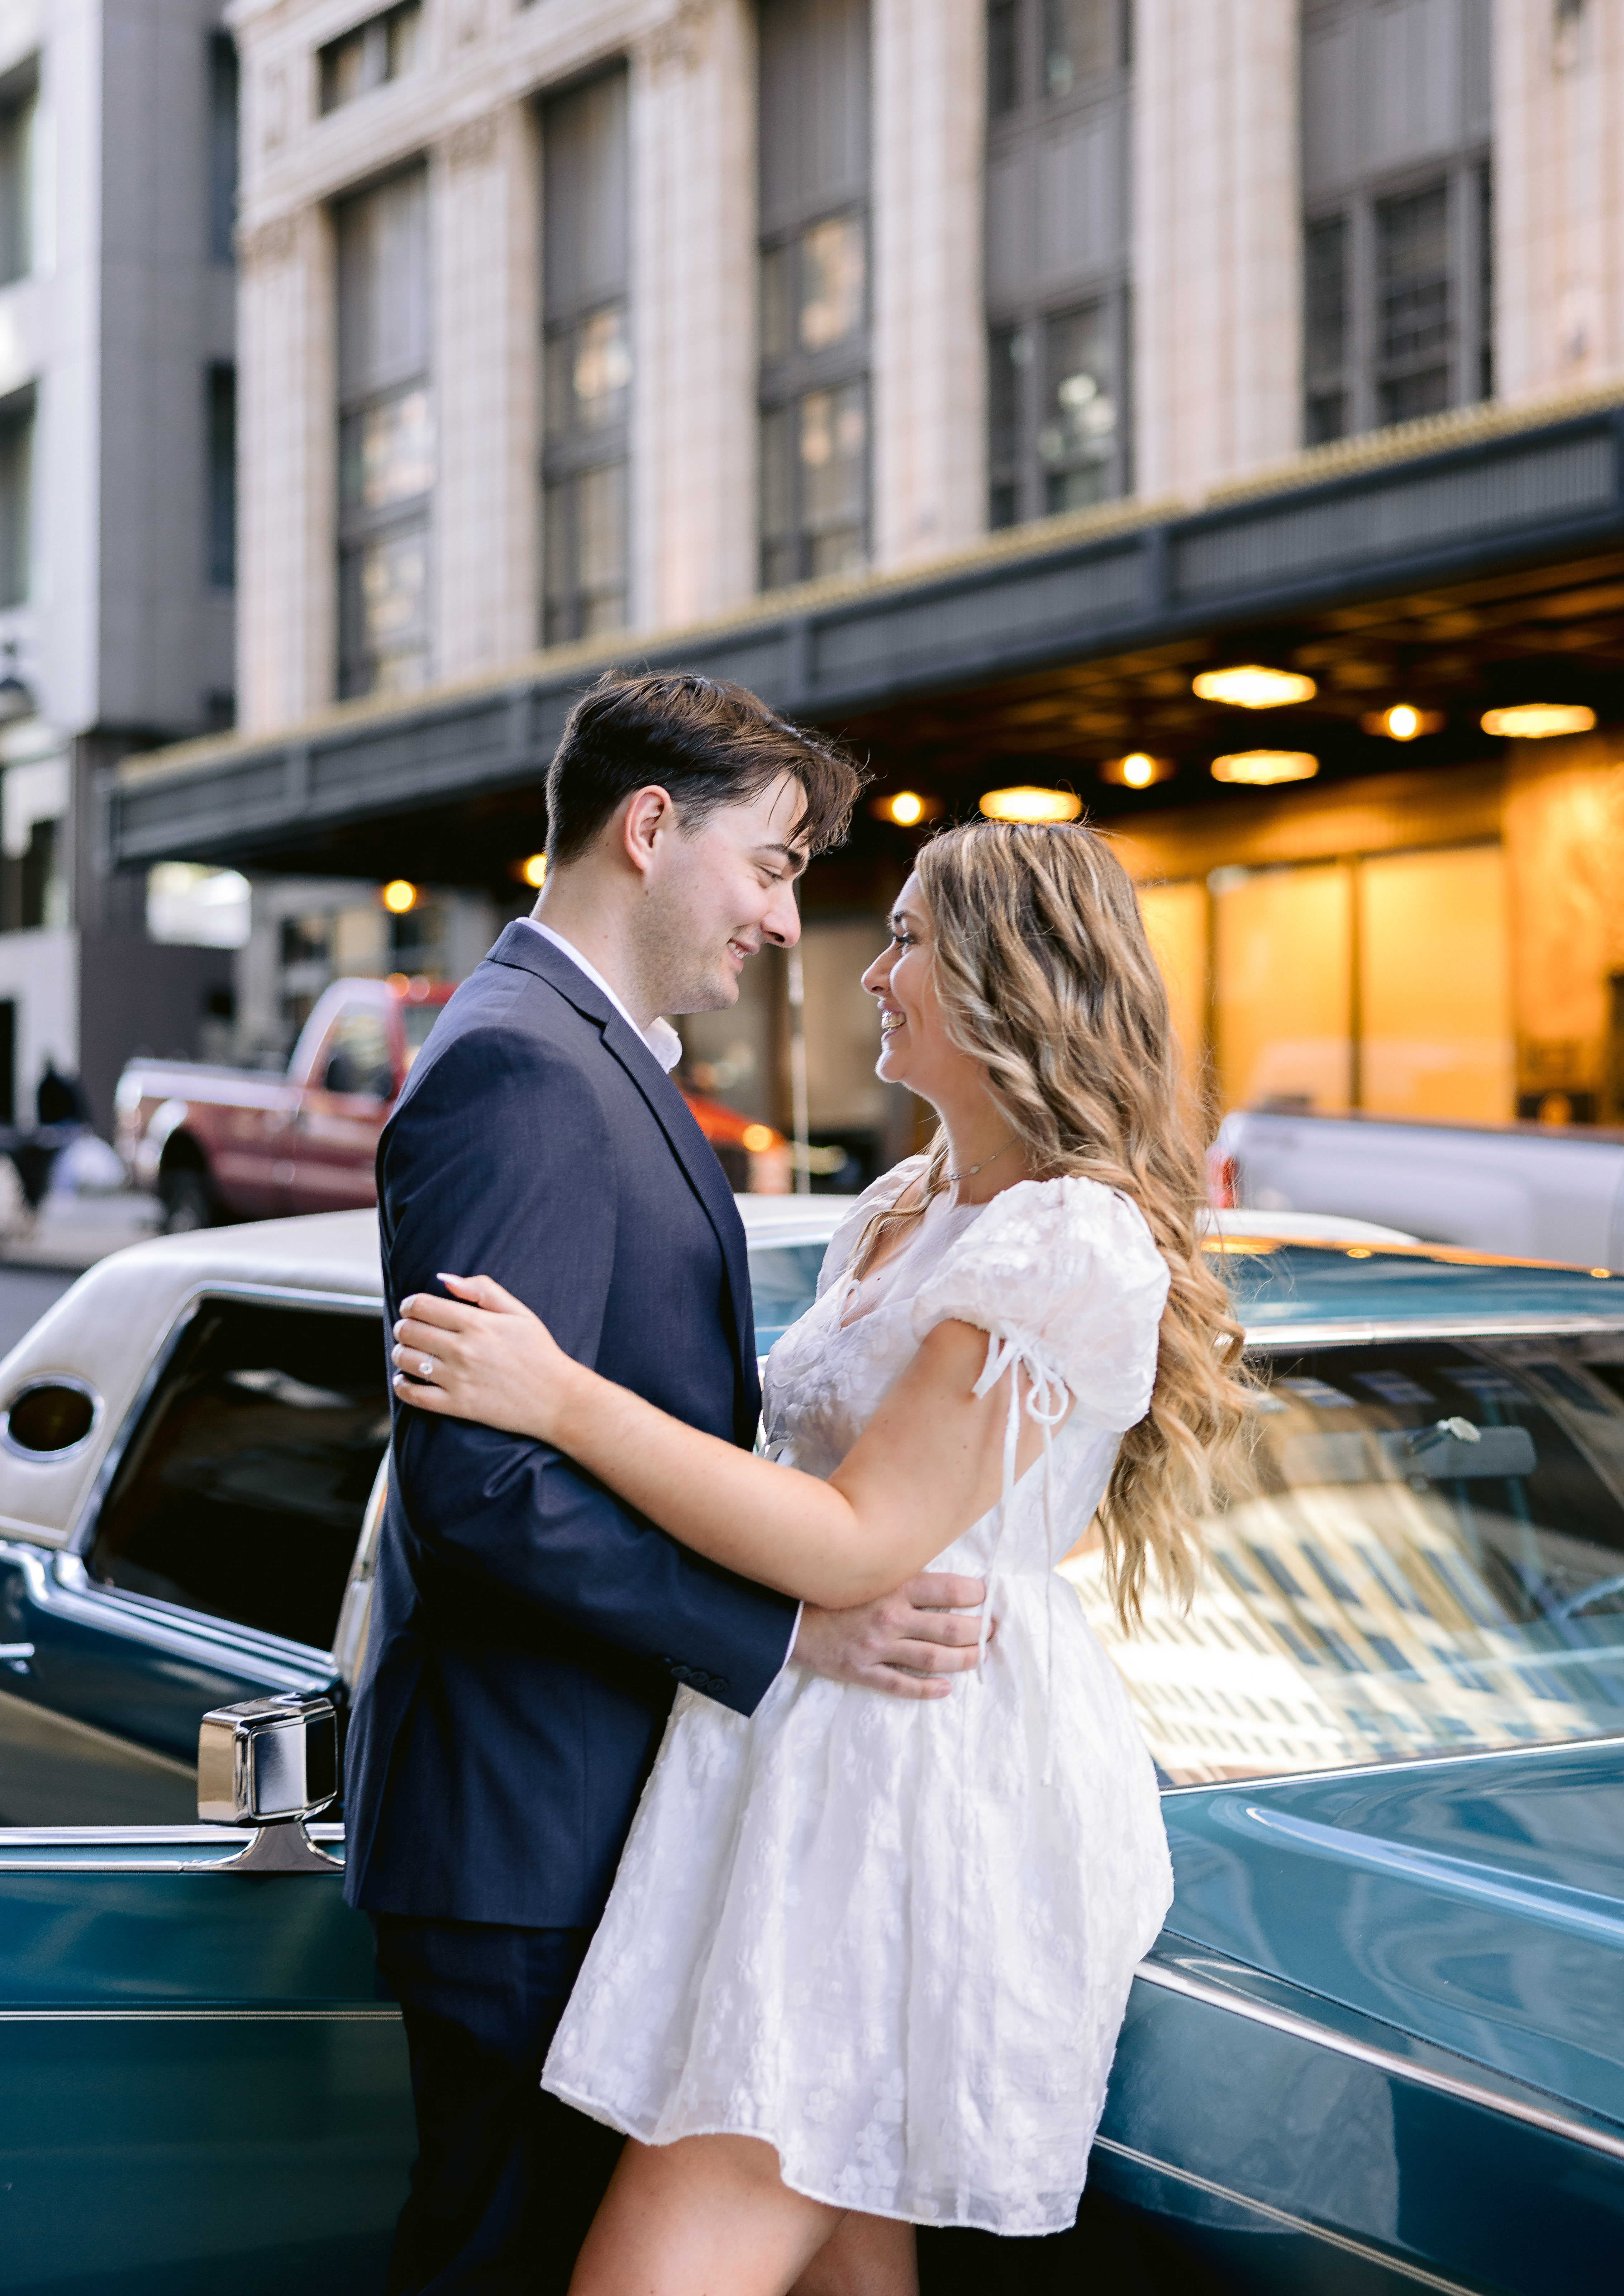 Romantic and formal engagement photos in downtown kc photography